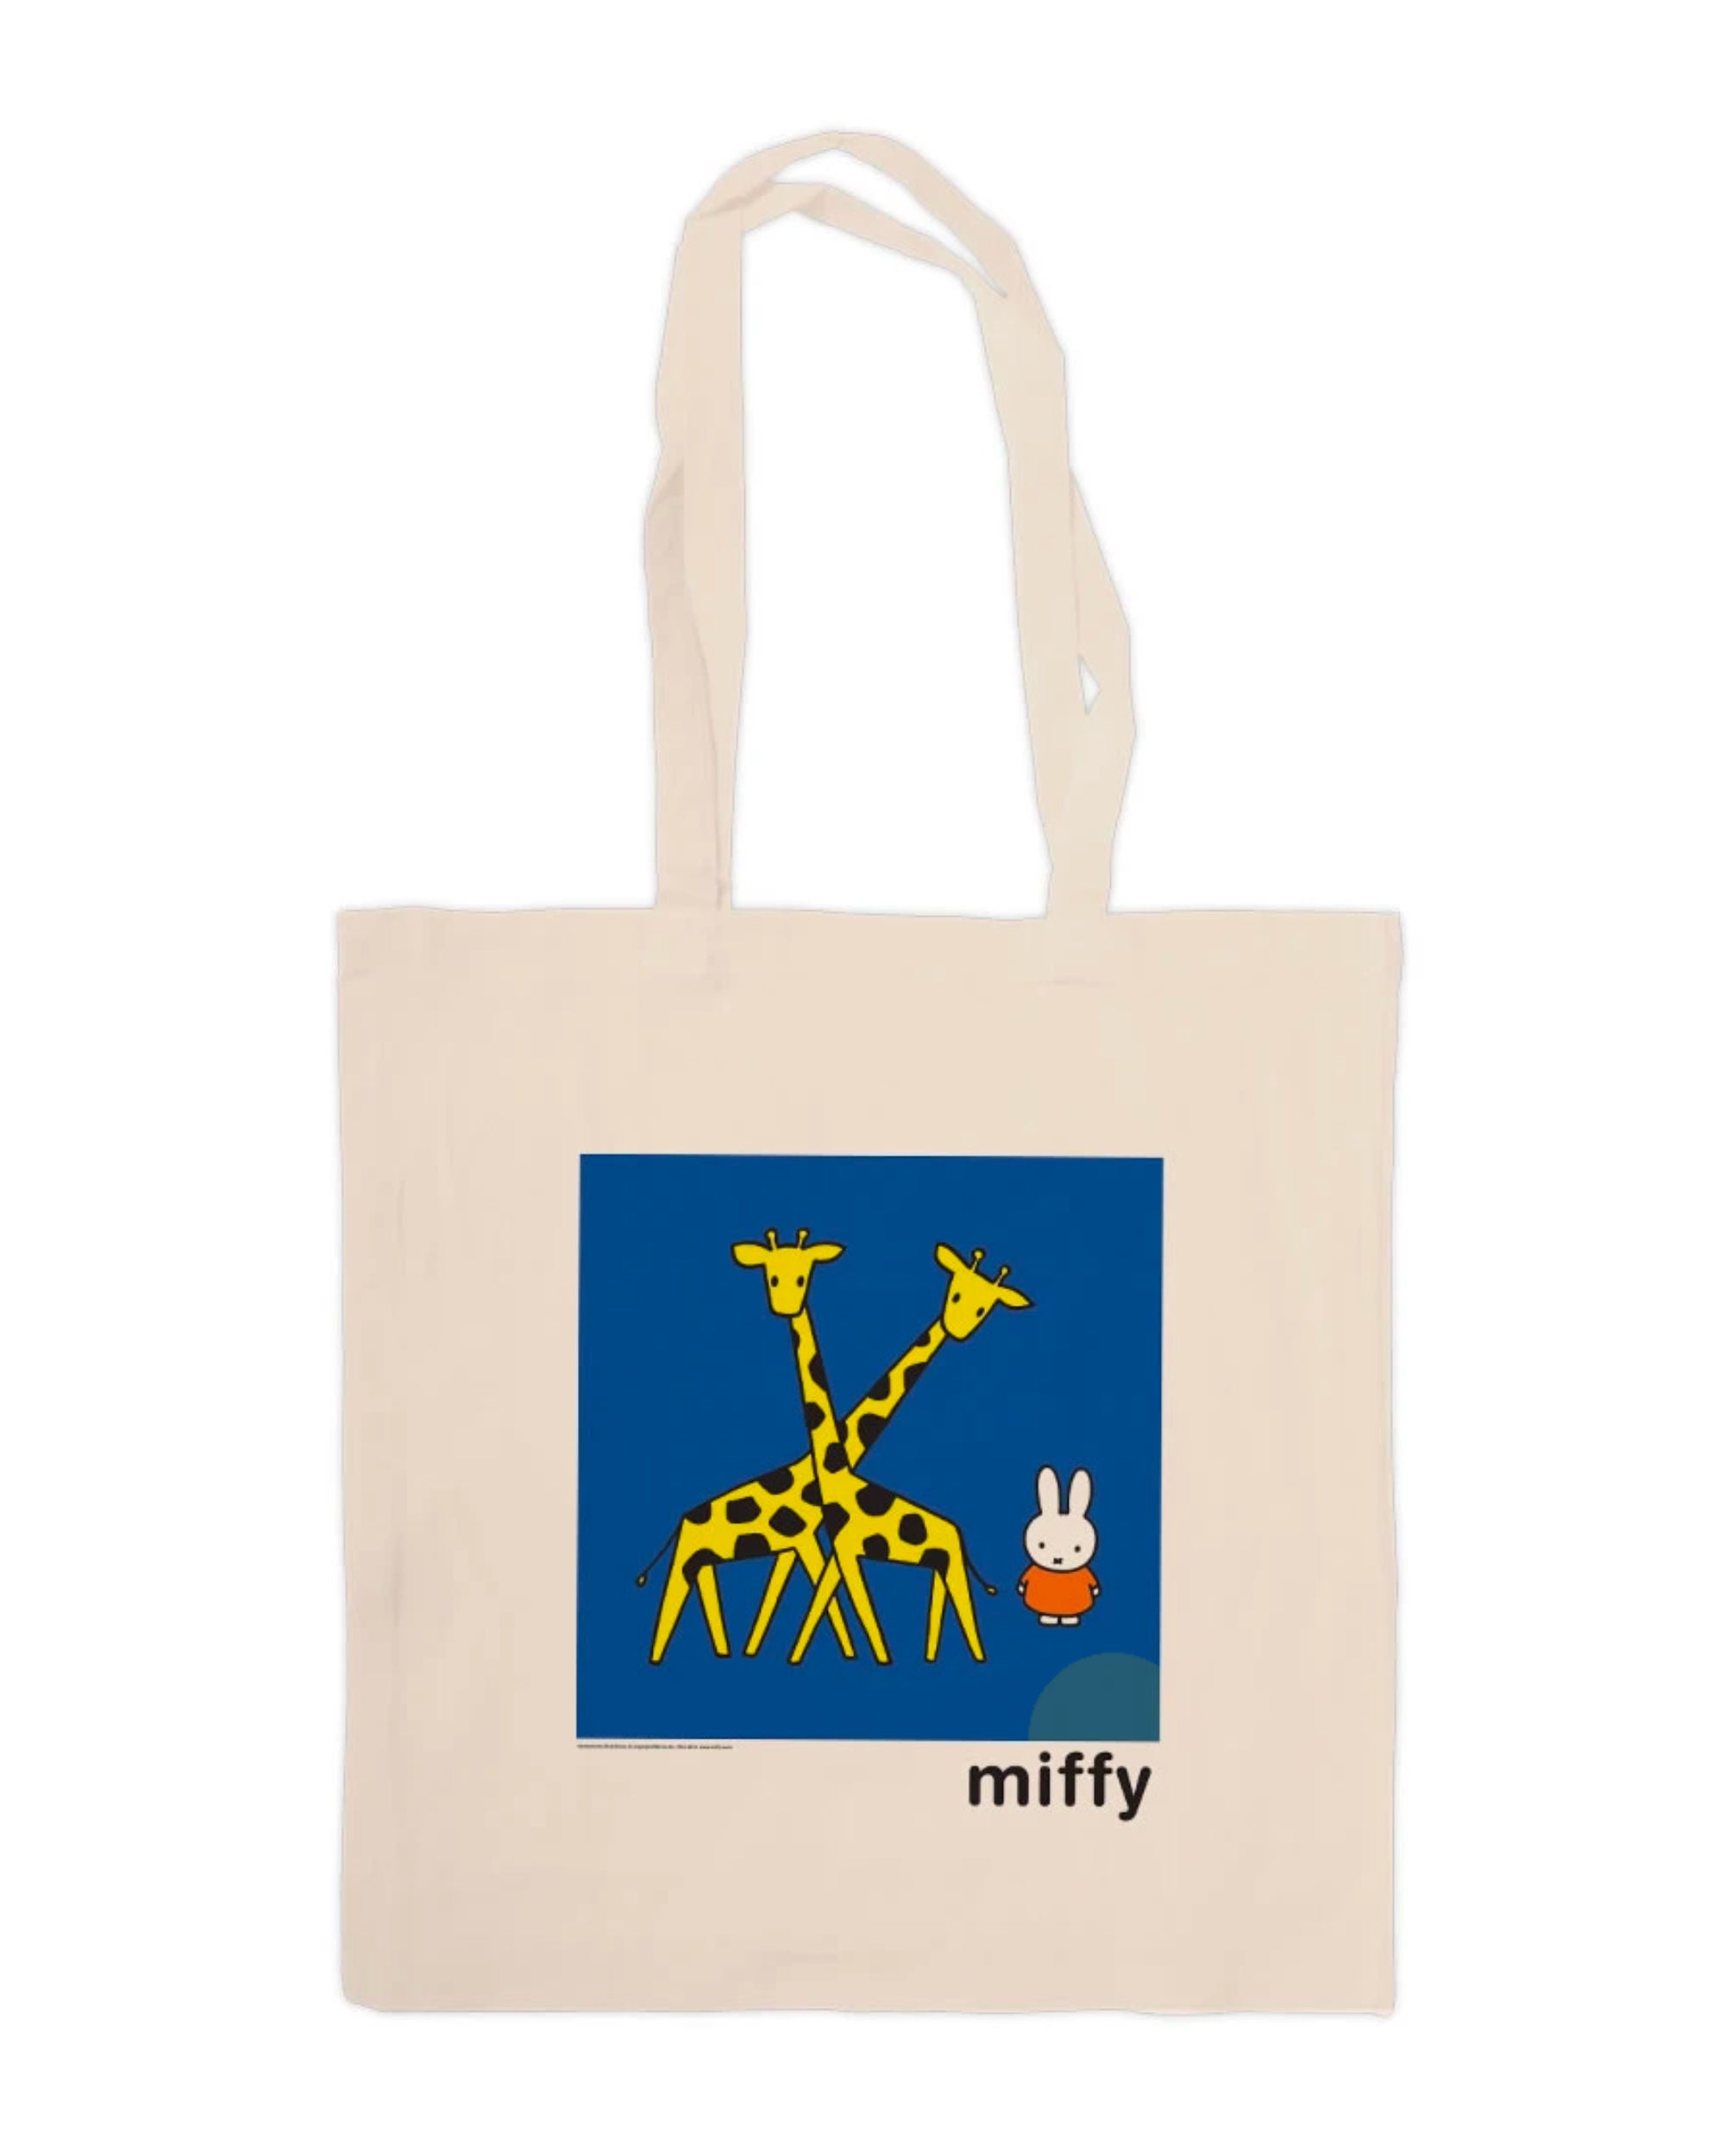 Star Edition Miffy canvas tote bag, miffy with two giraffes